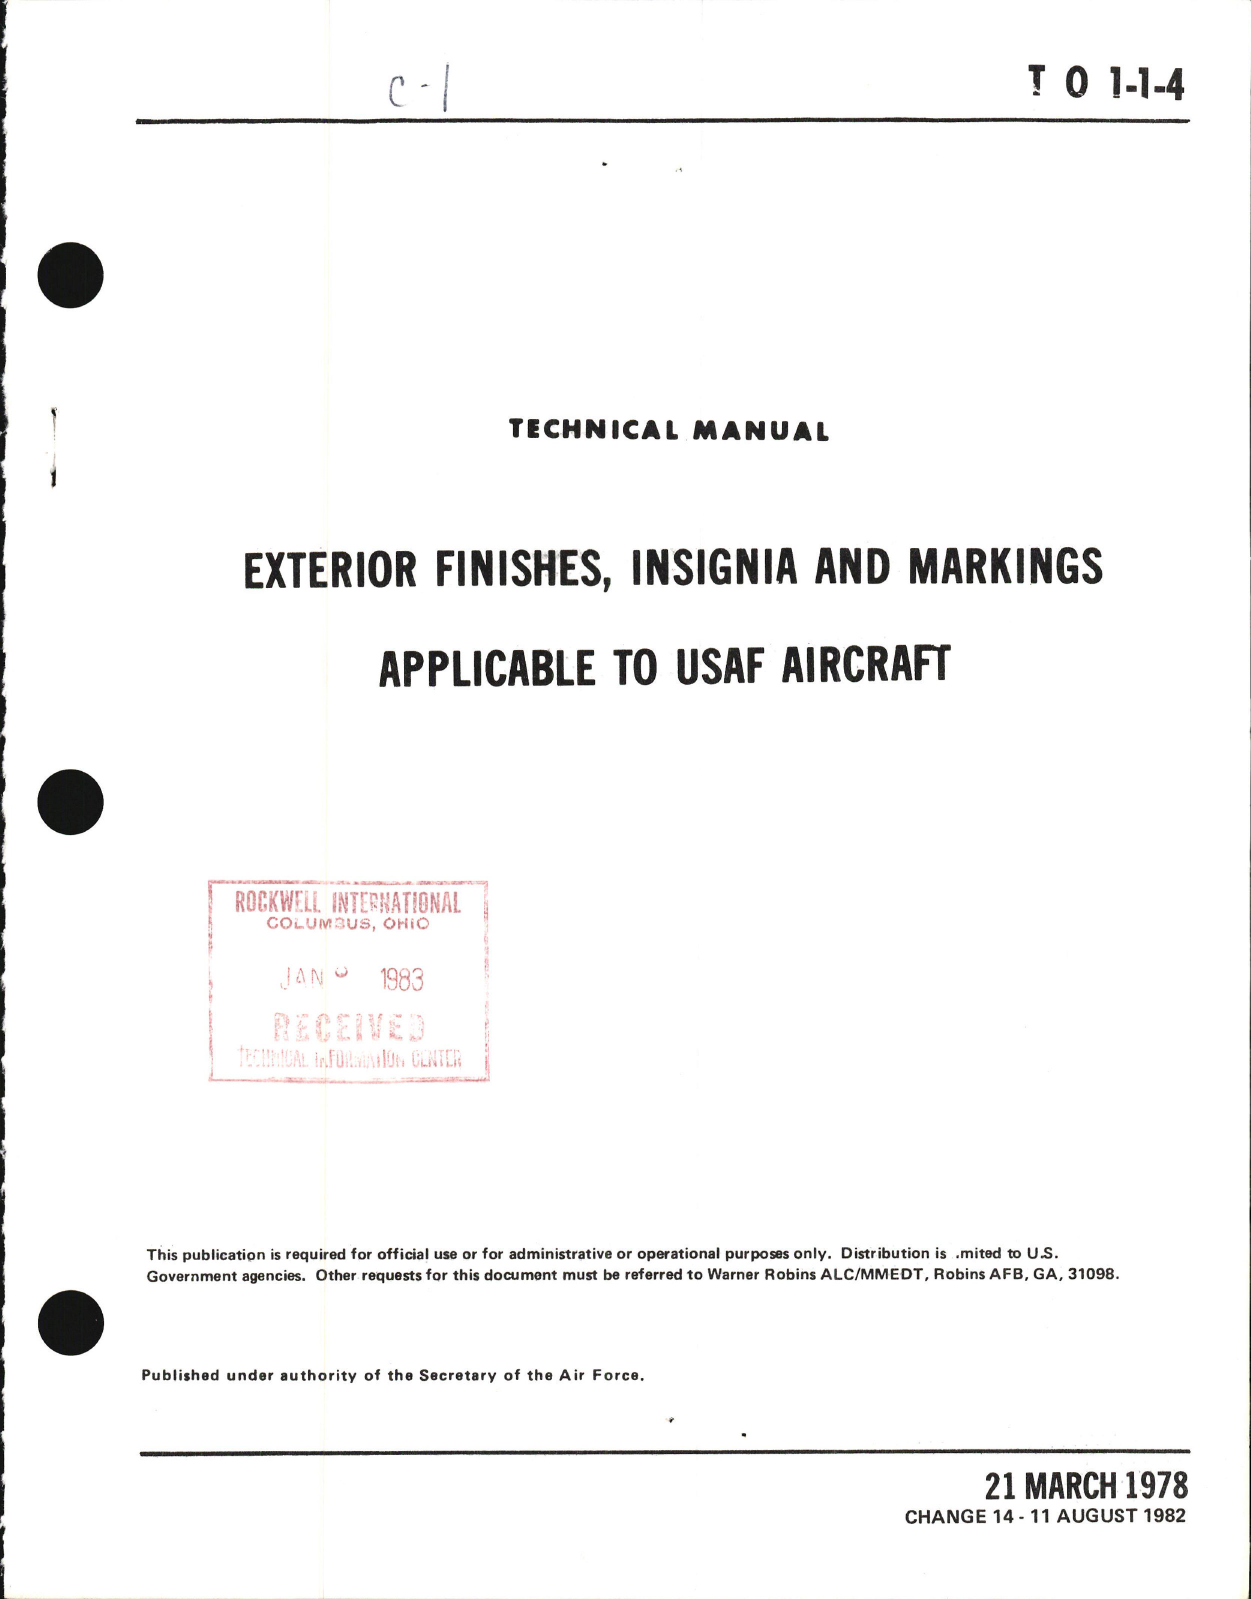 Sample page 1 from AirCorps Library document: Exterior Finishes, Insignia and Markings for USAF Aircraft - Change - 14